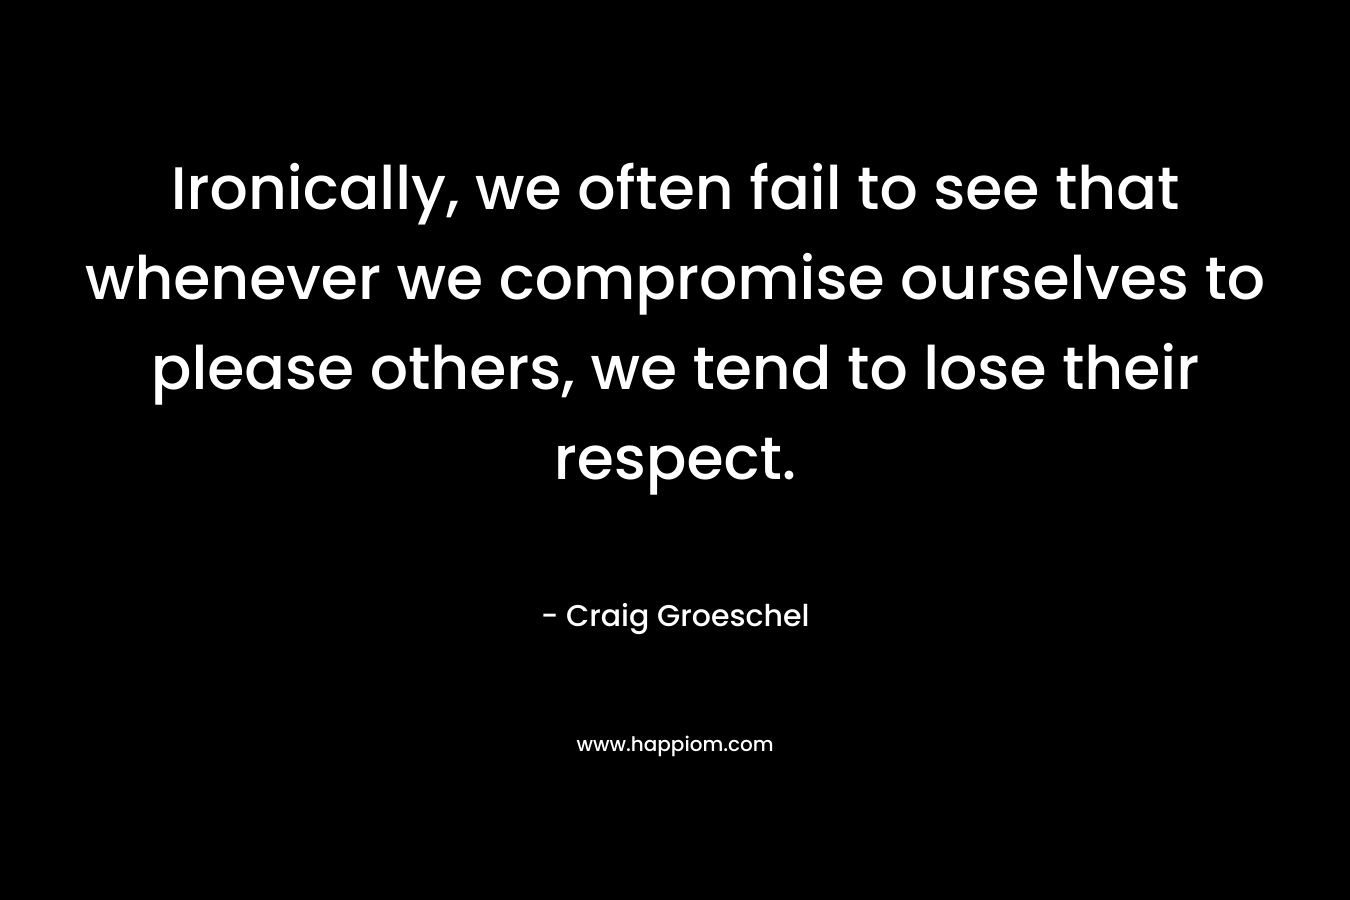 Ironically, we often fail to see that whenever we compromise ourselves to please others, we tend to lose their respect.